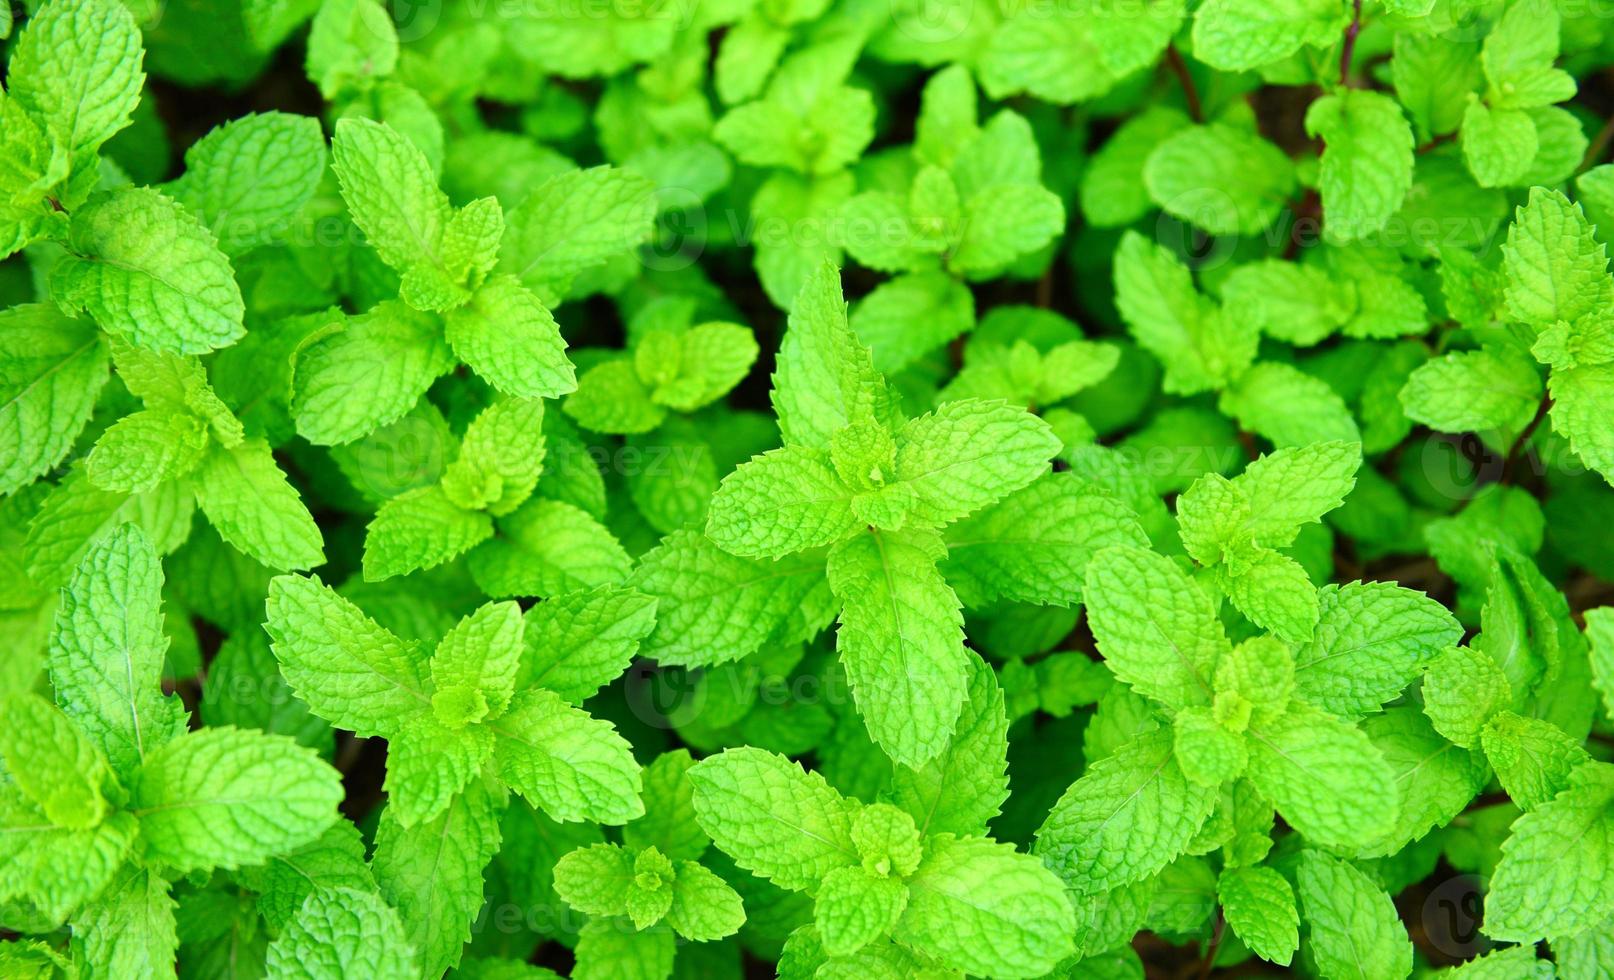 Peppermint leaf in the garden background - Fresh mint leaves in a nature green herbs or vegetables food photo